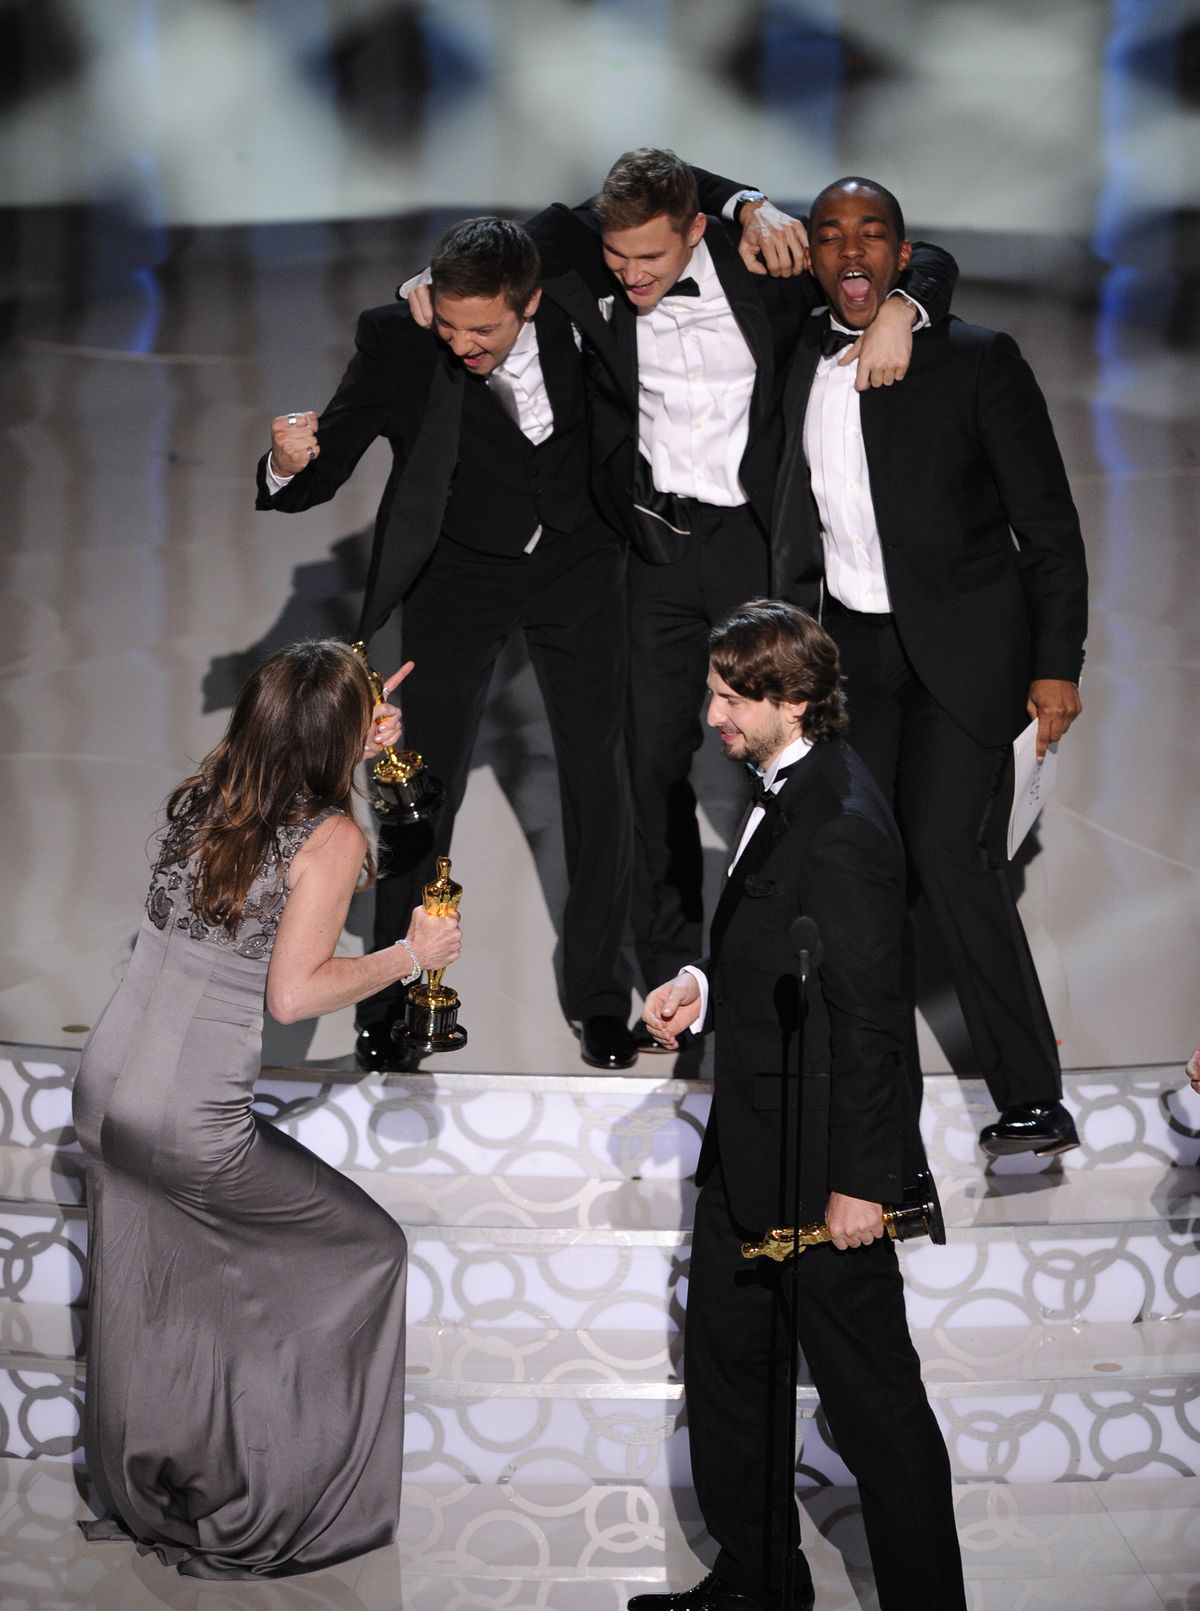 In foreground, Kathryn Bigelow, left,  and Mark Boal,  celebrate with cast of "The Hurt Locker" as they accept the Oscar for best motion picture of the year at the 82nd Academy Awards Sunday, March 7, 2010, in the Hollywood section of Los Angeles. In background from left are Jeremy Renner, Brian Geraghty  and Anthony Mackie. (Mark Terrill / Associated Press)